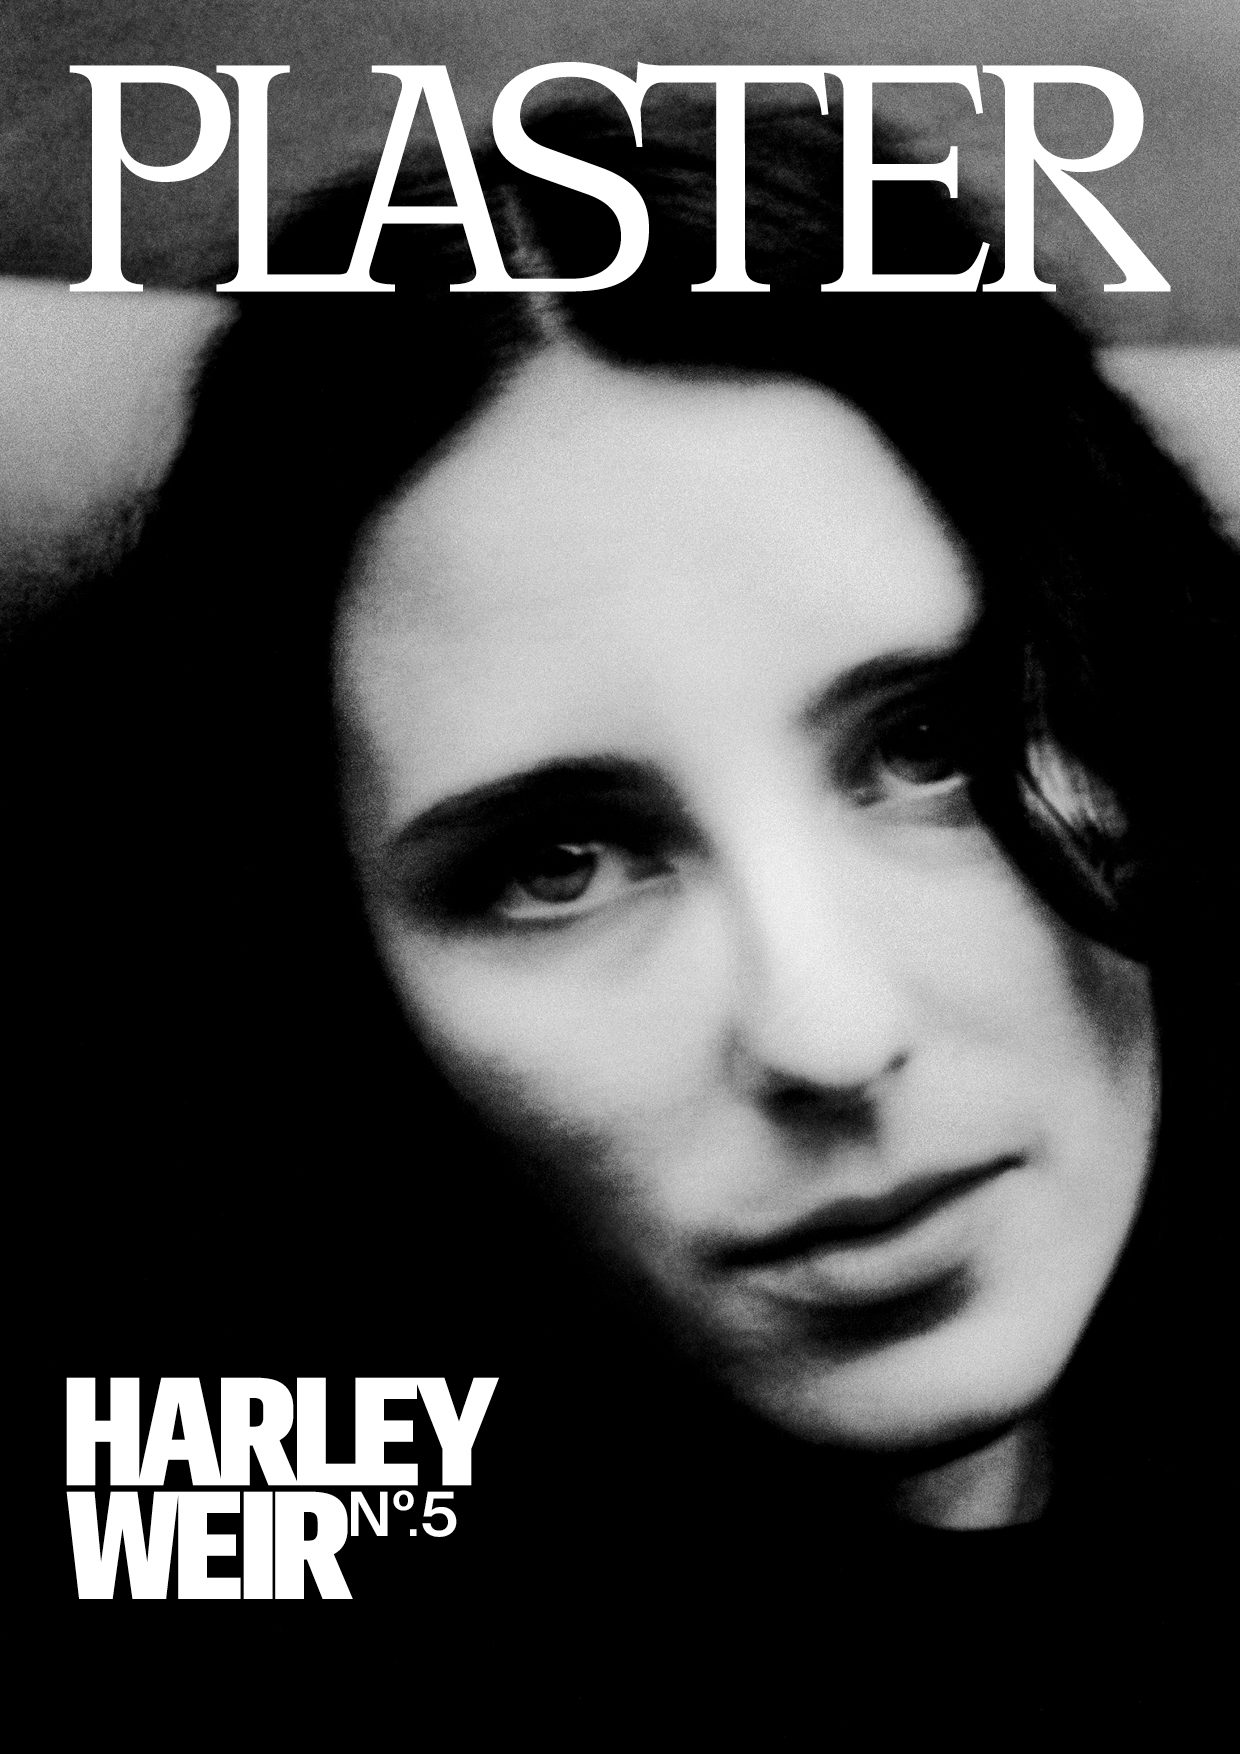 Harley Weir for Plaster No. 5, cover